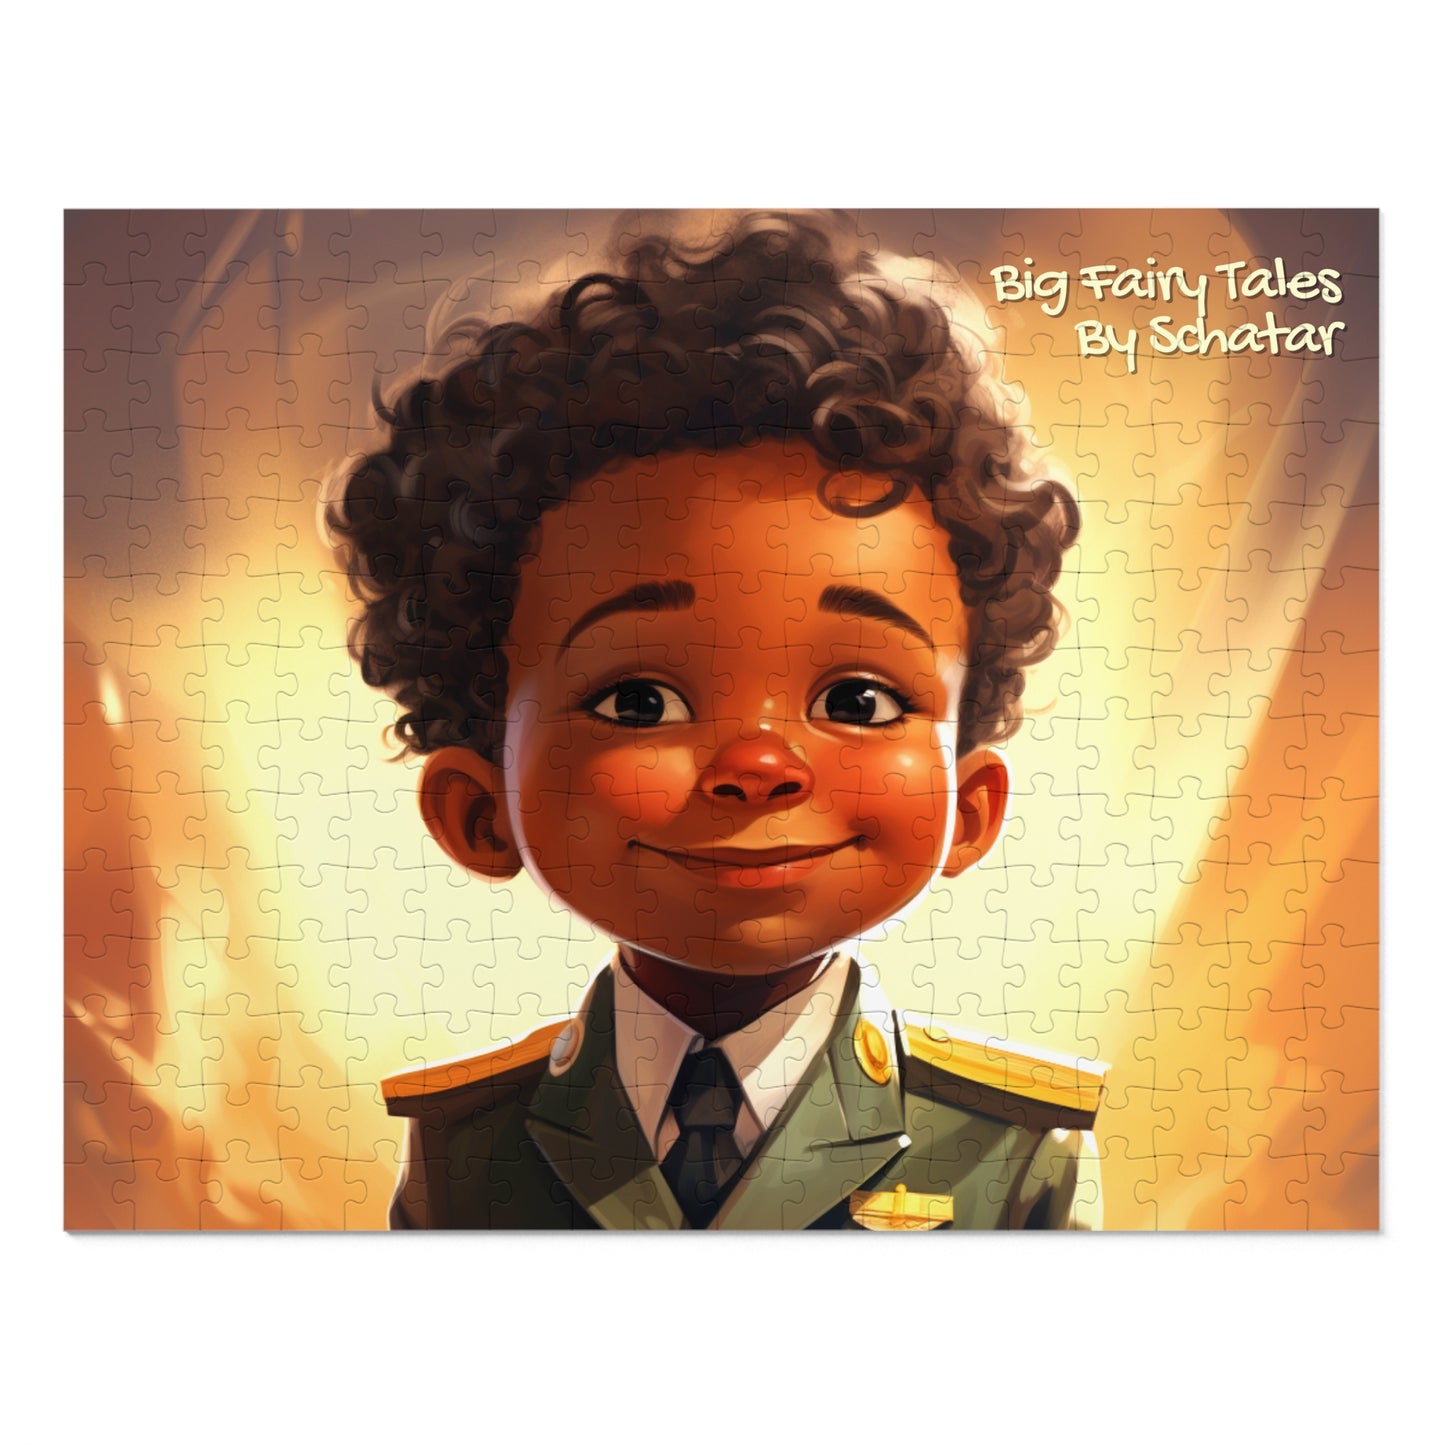 Military Officer - Big Little Professionals Puzzle 14 From Big Fairy Tales By Schatar